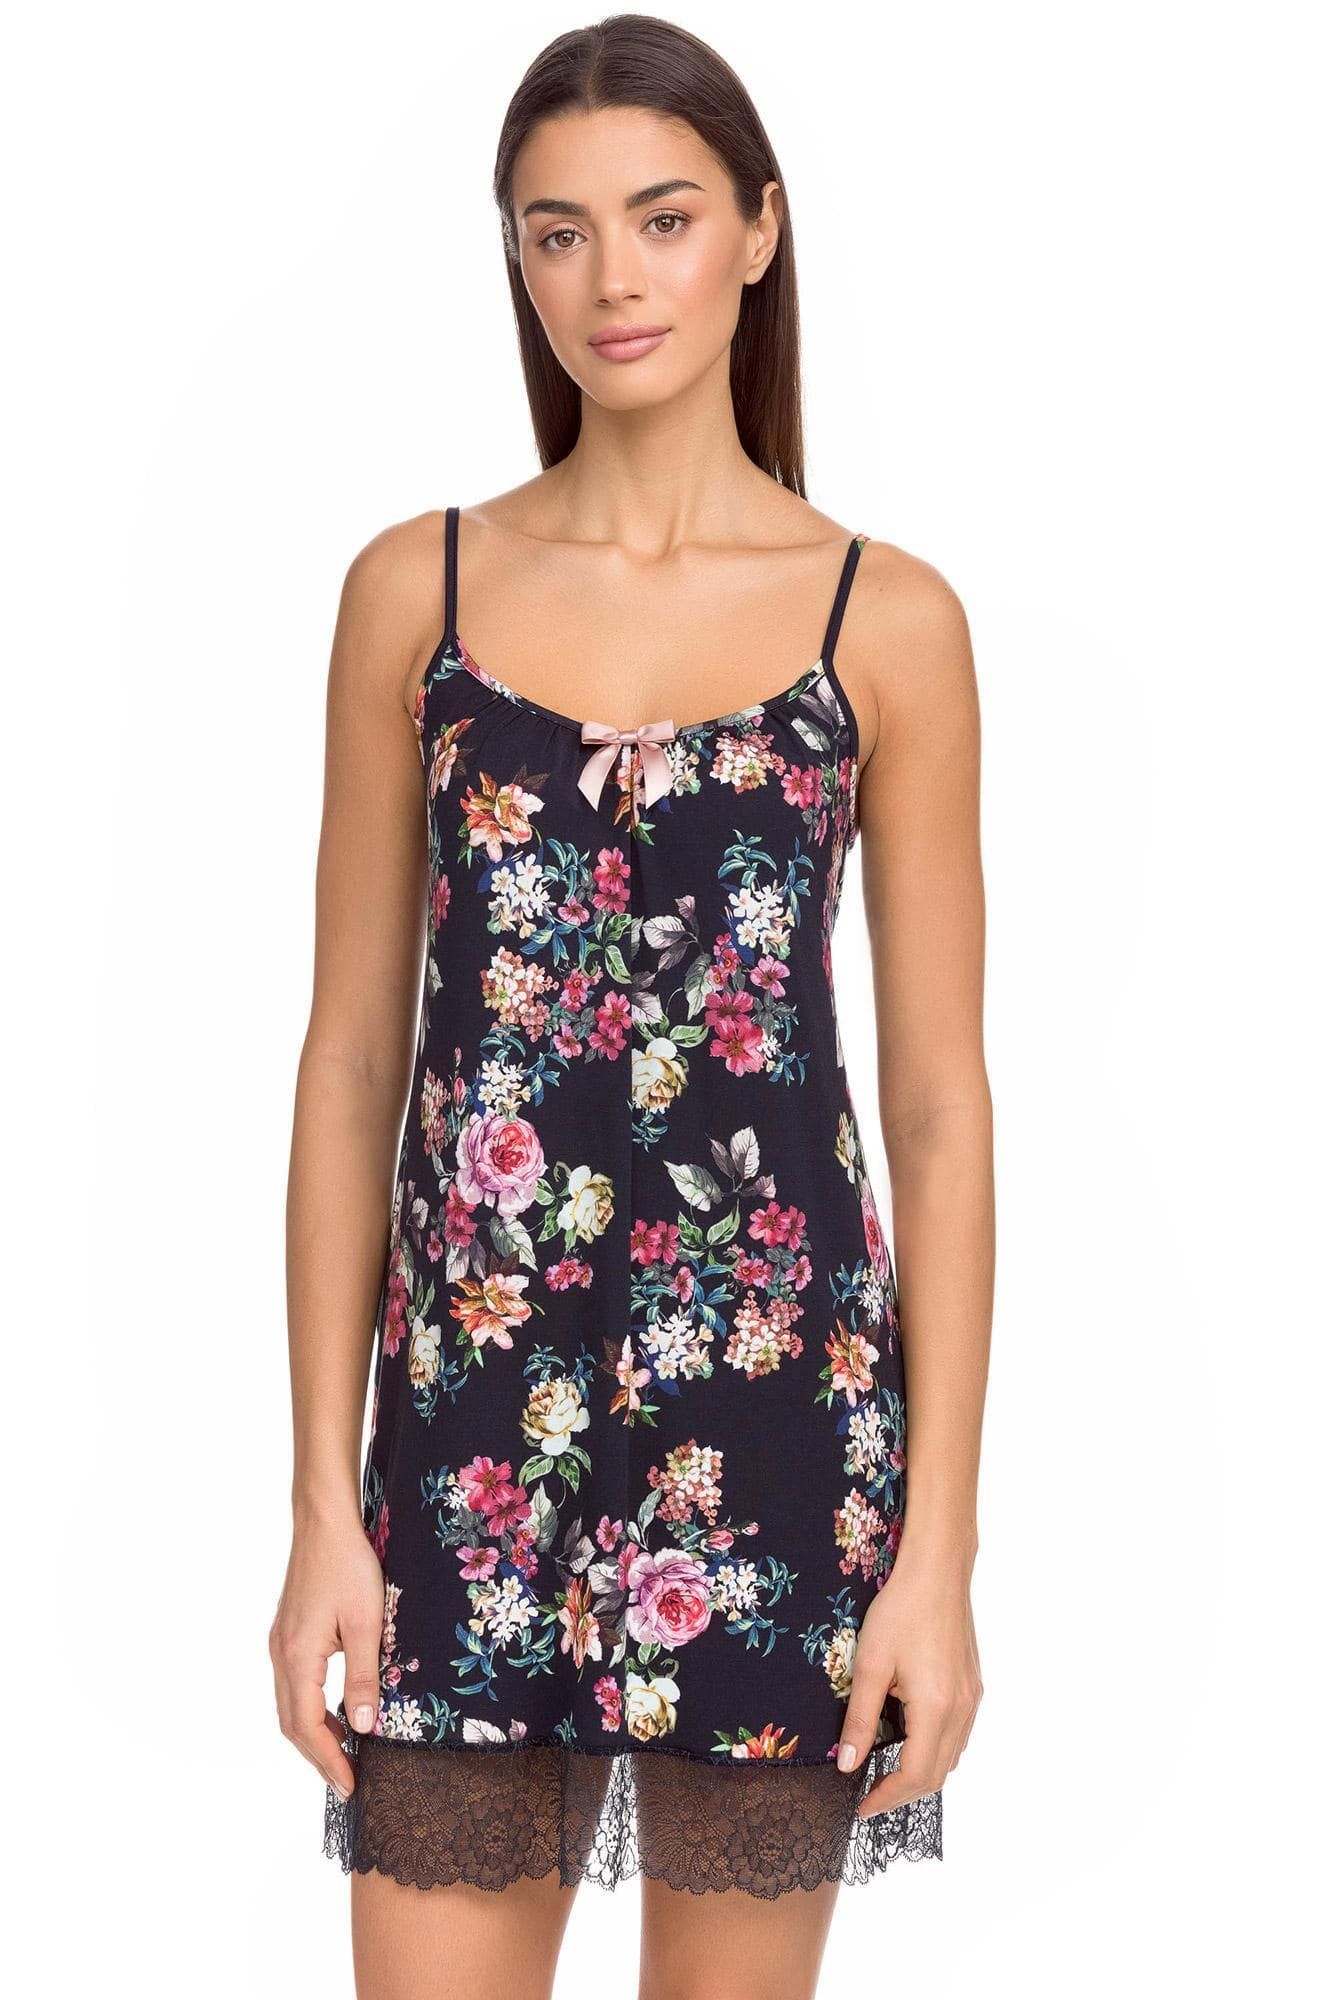 Women’s floral nightgown